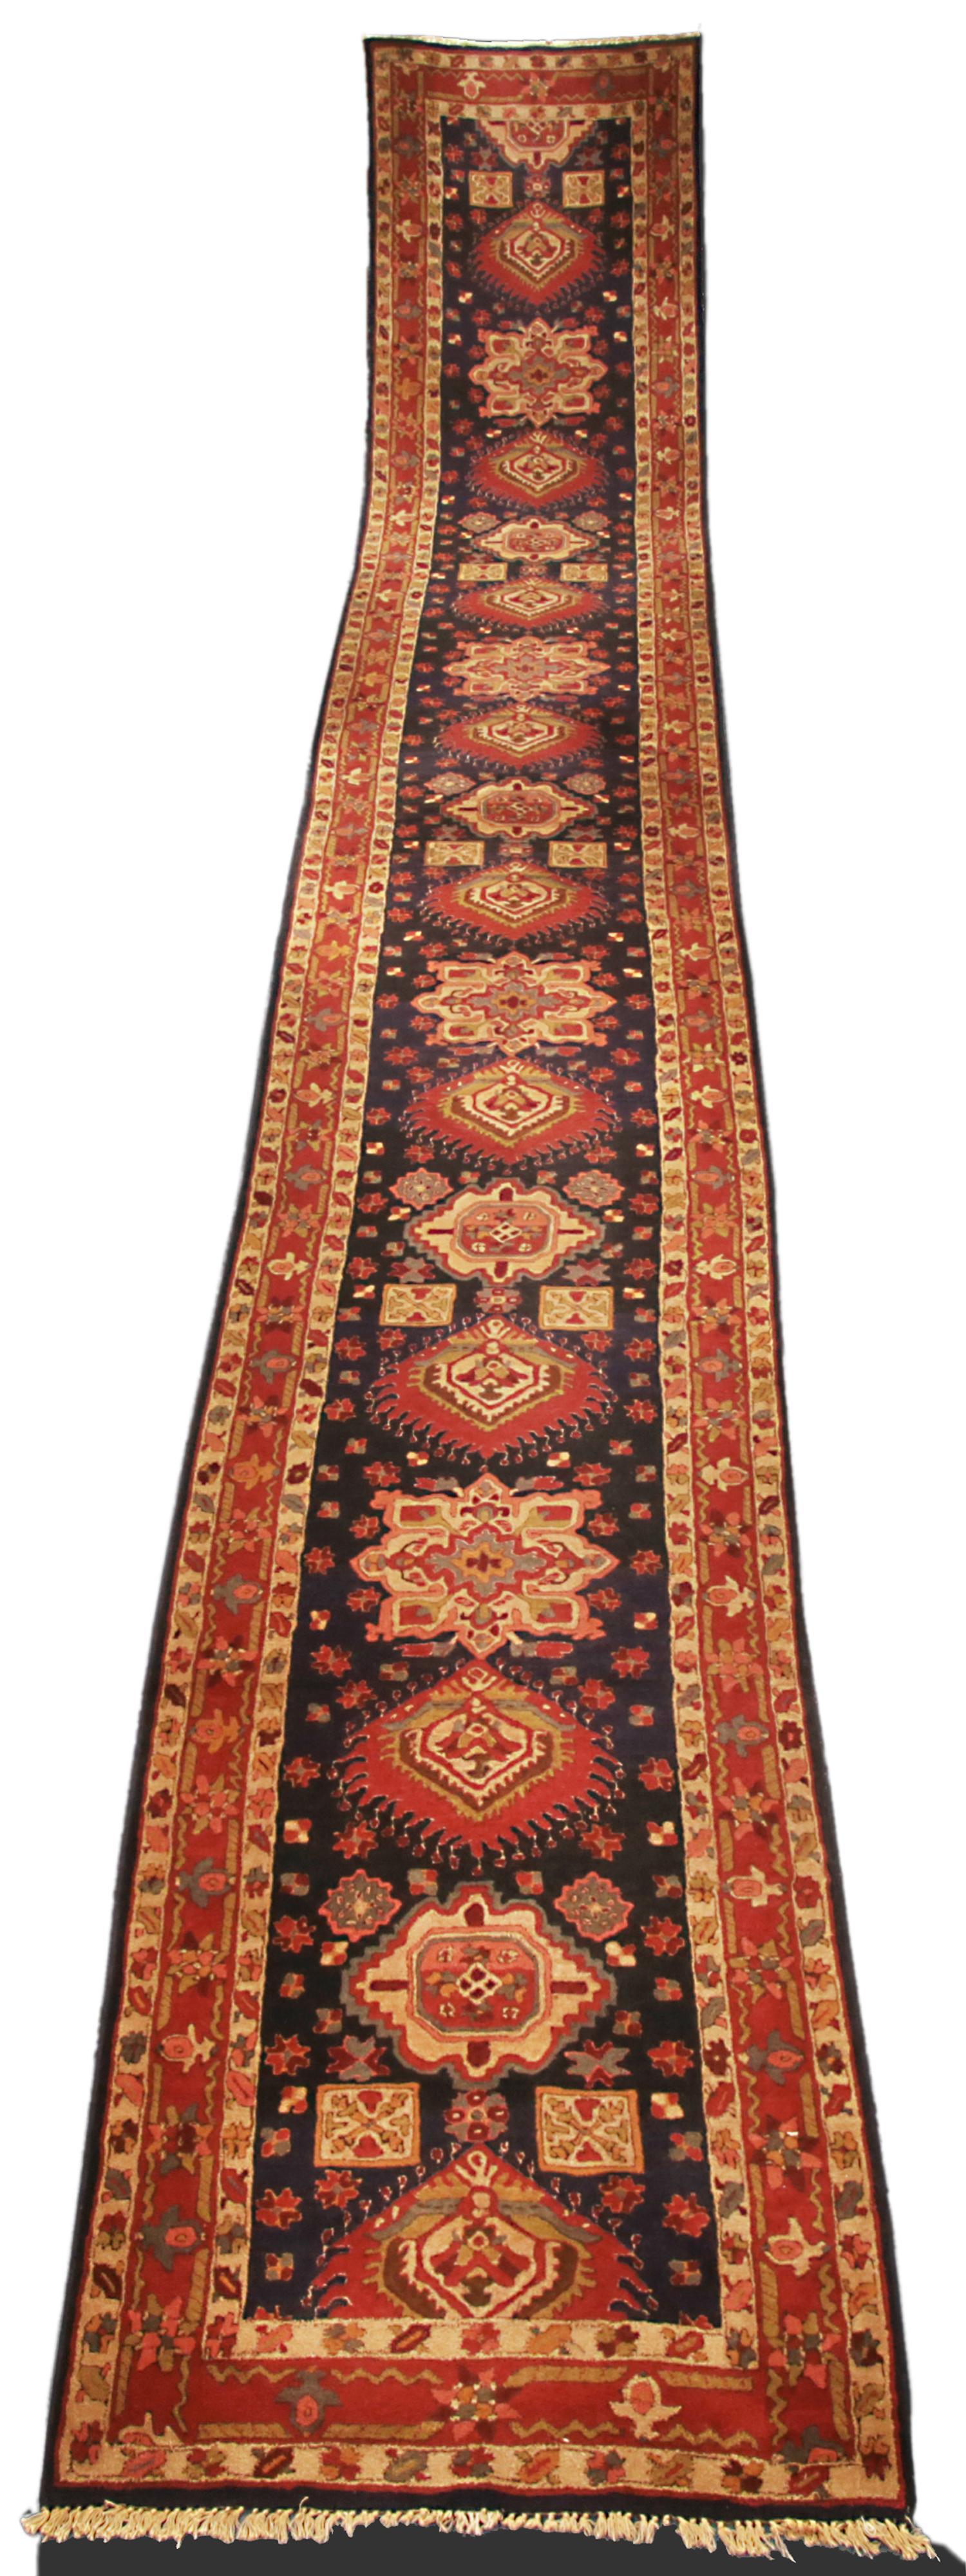 This is an antique German Tetex runner woven circa 1940 and measures 740 x 100CM in size. This rug's design is inspired by the Karajah rug woven in Northwest Persia and its geometric design makes them extremely desirable by designers and collectors